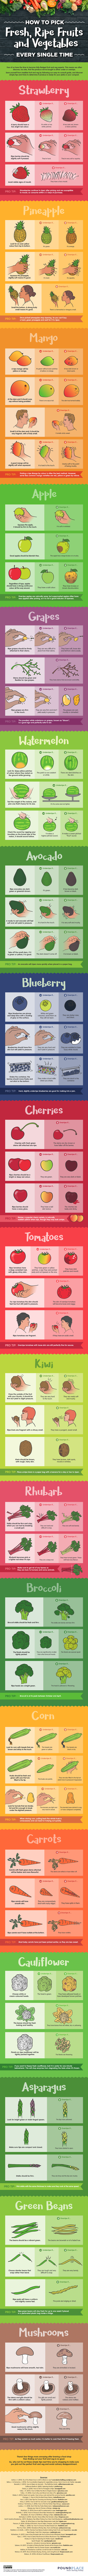 How To Pick Fresh, Ripe Fruits And Vegetables Every Single Time #infographic